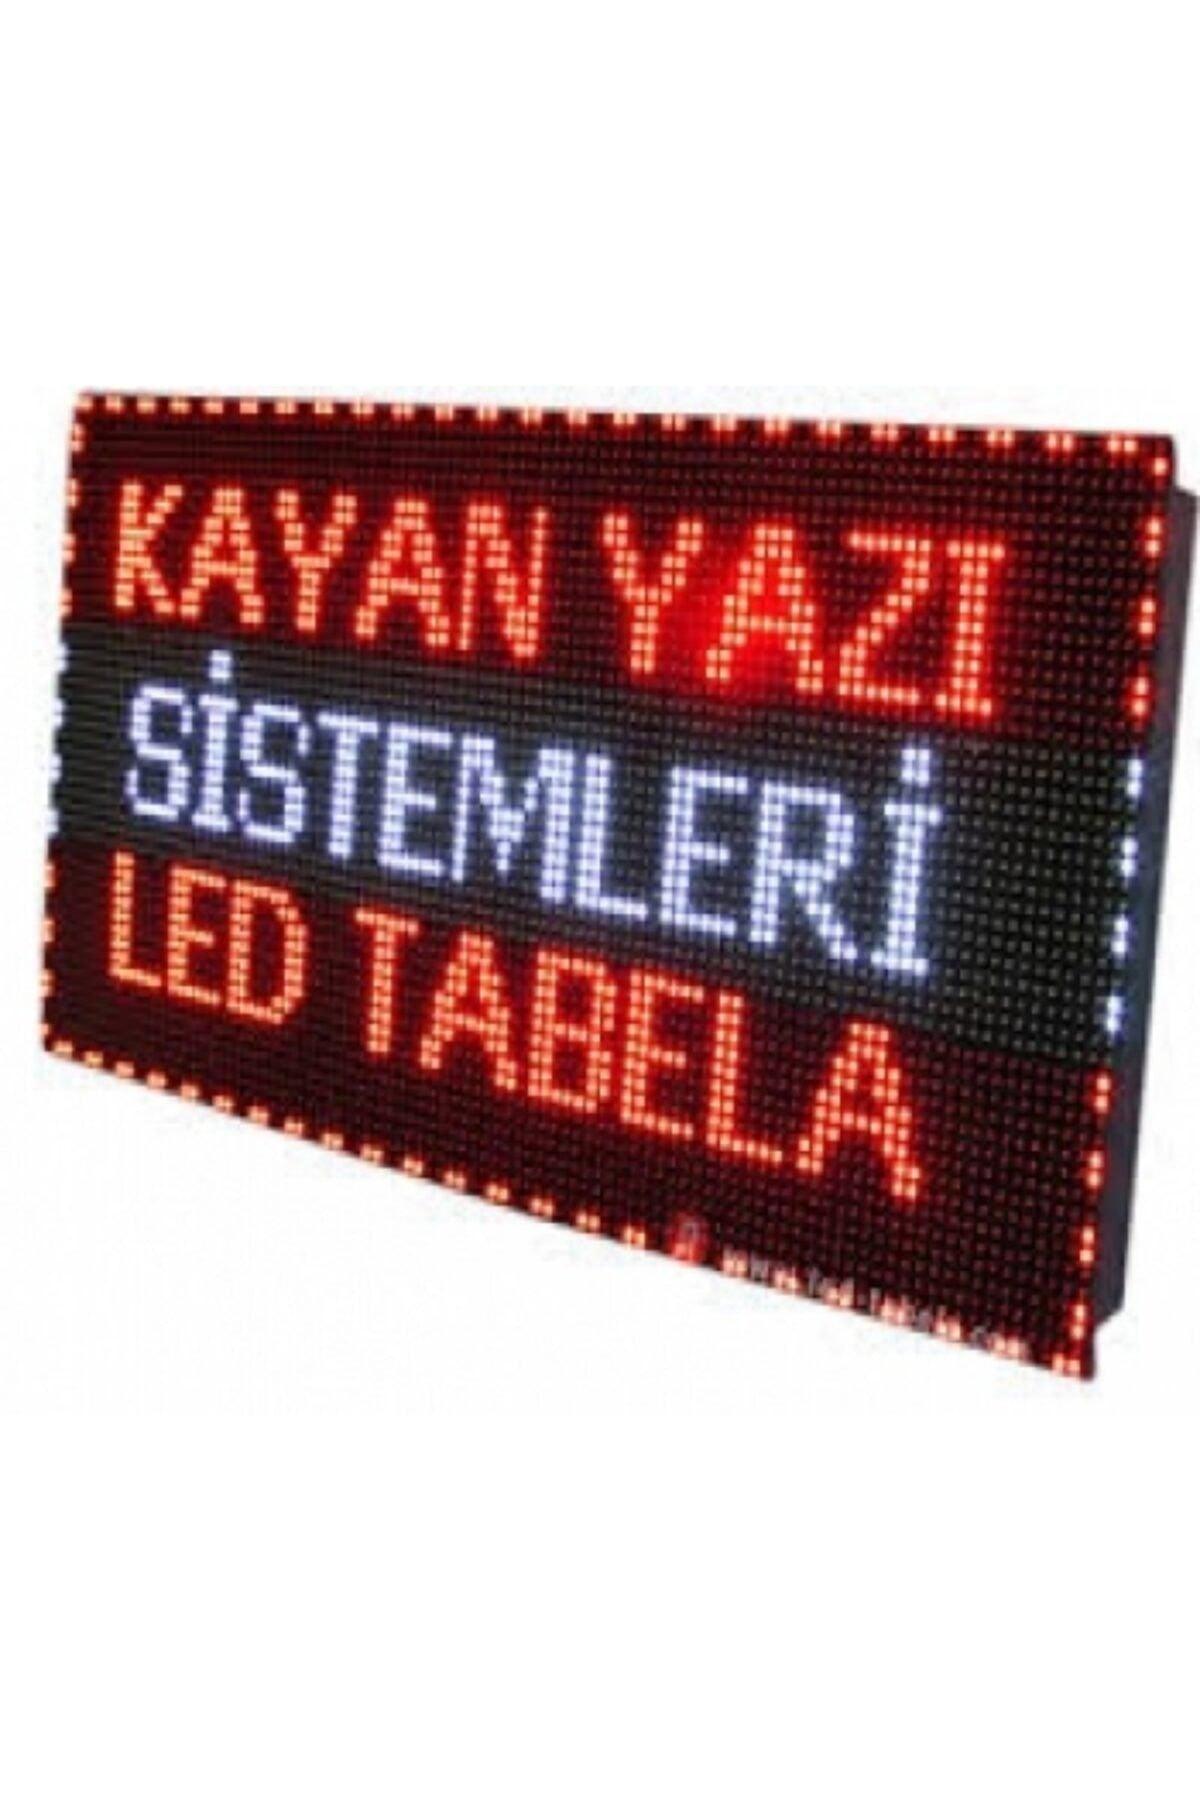 Led Signage 16*160 Marquee Red